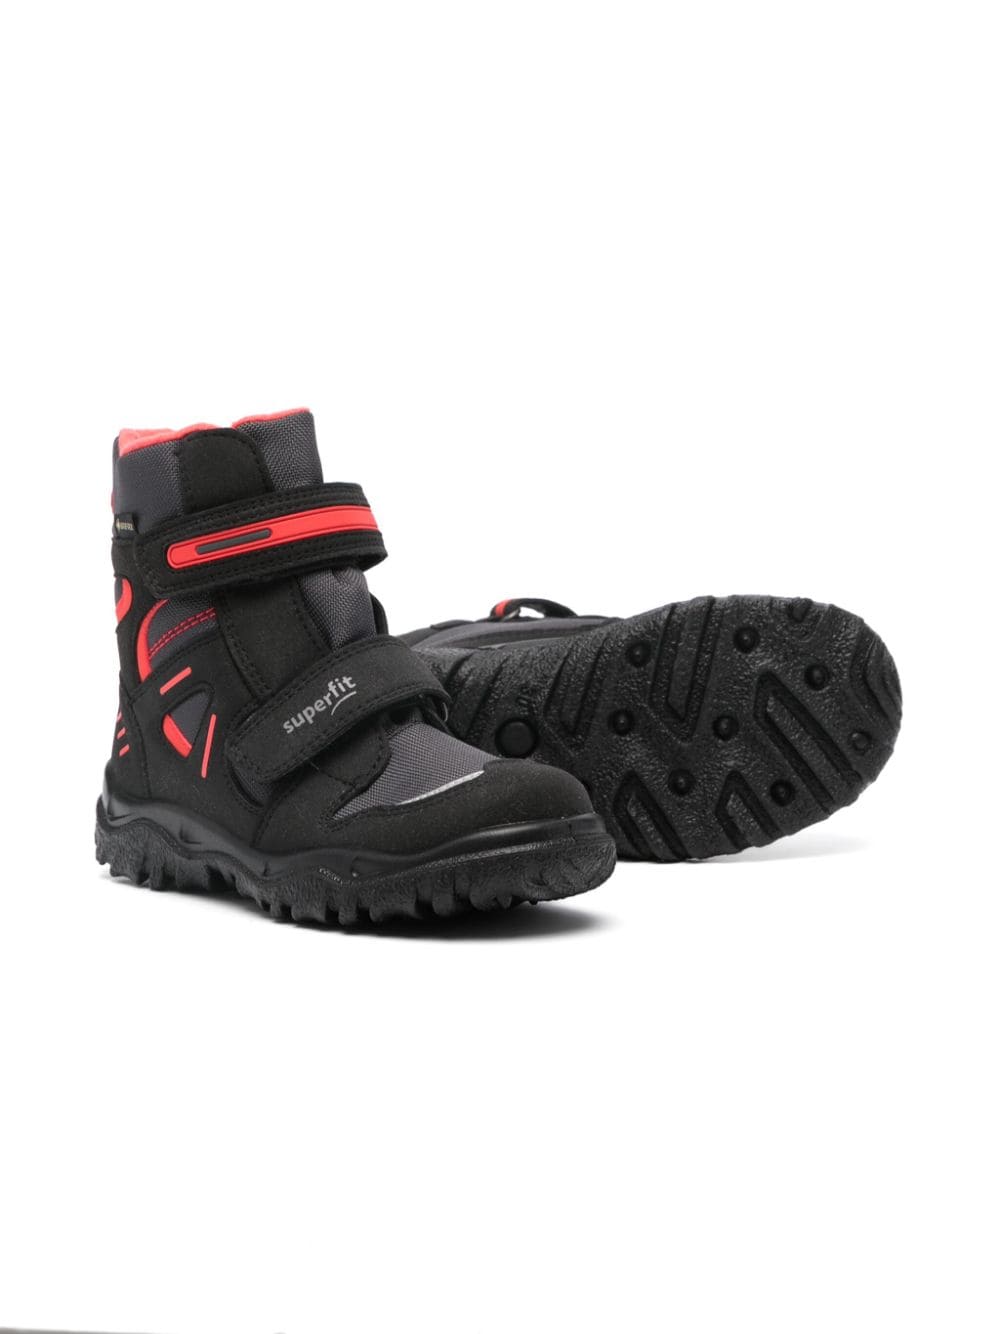 Superfit Husky touch-strap boots Black